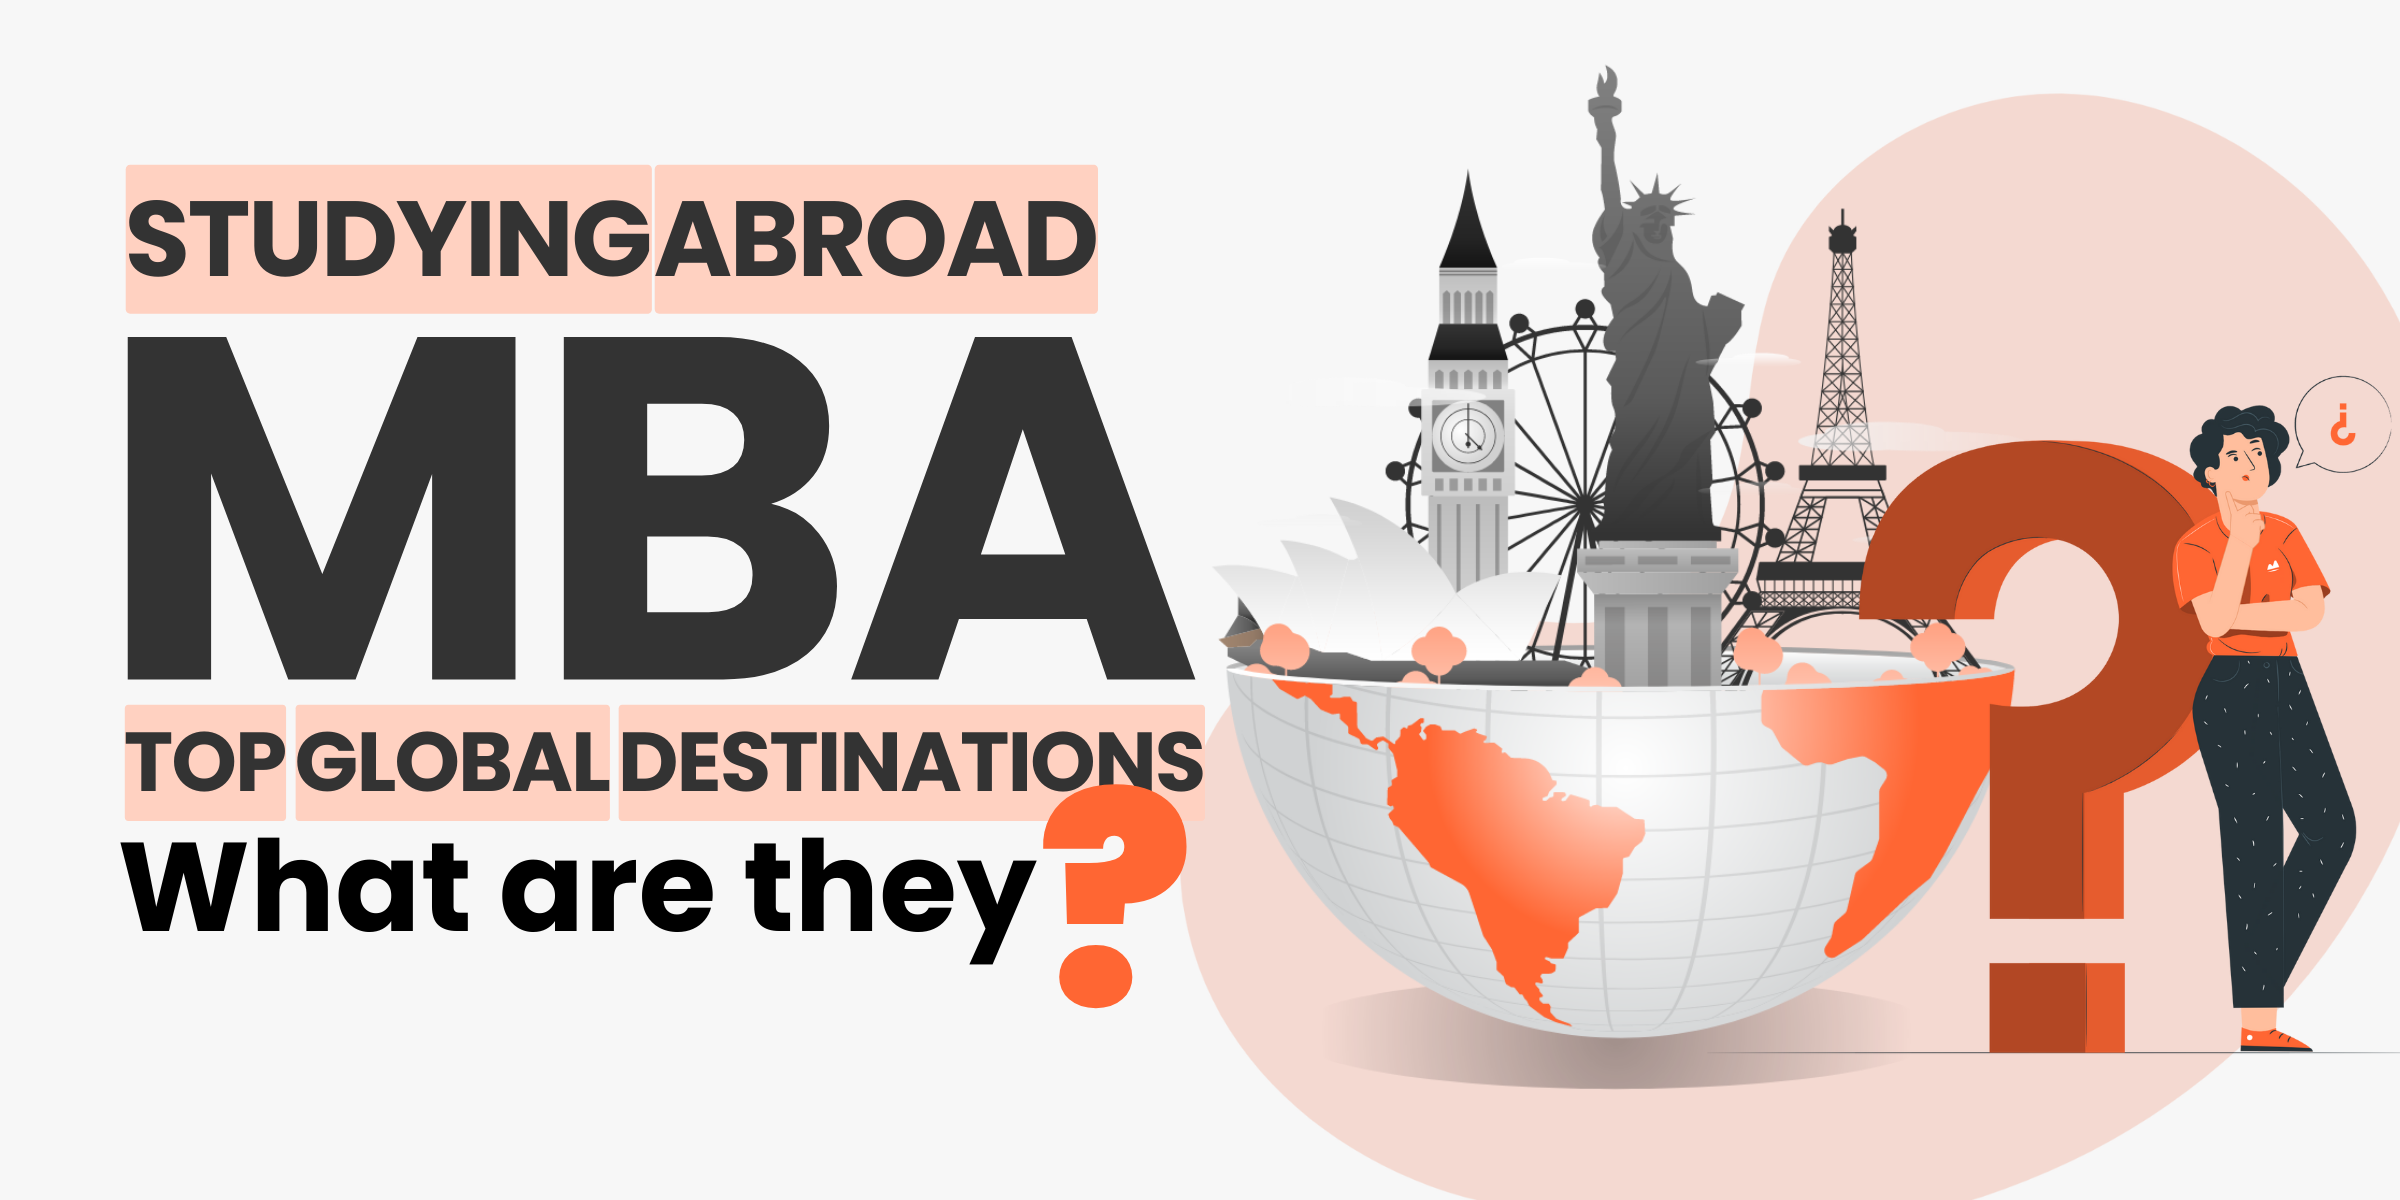 Top Destinations for MBA to Study Abroad